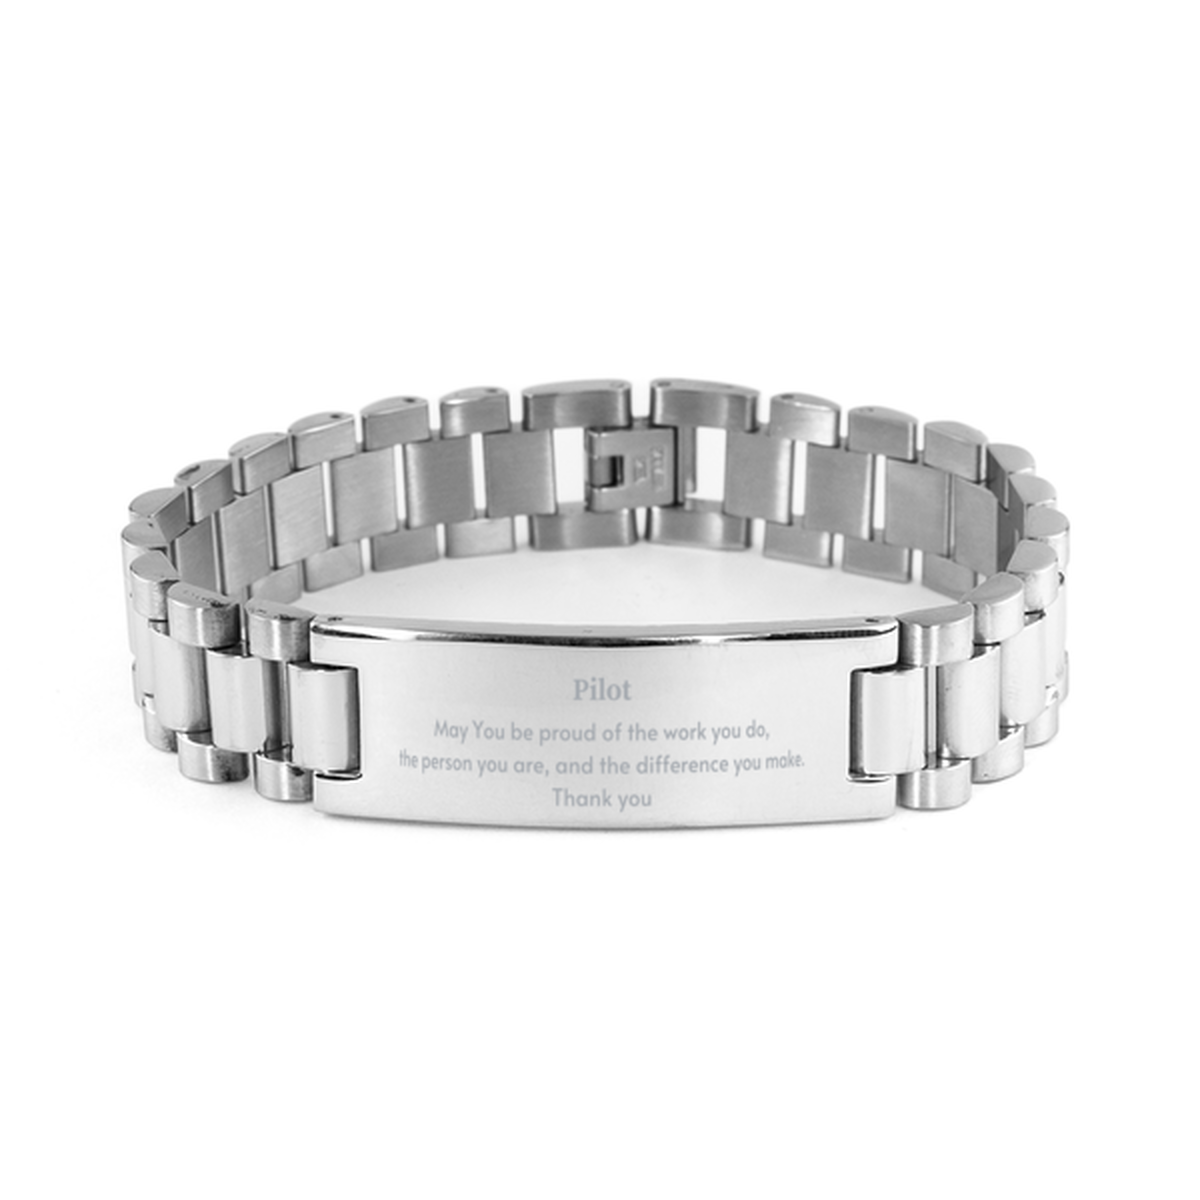 Heartwarming Ladder Stainless Steel Bracelet Retirement Coworkers Gifts for Pilot, Pilot May You be proud of the work you do, the person you are Gifts for Boss Men Women Friends